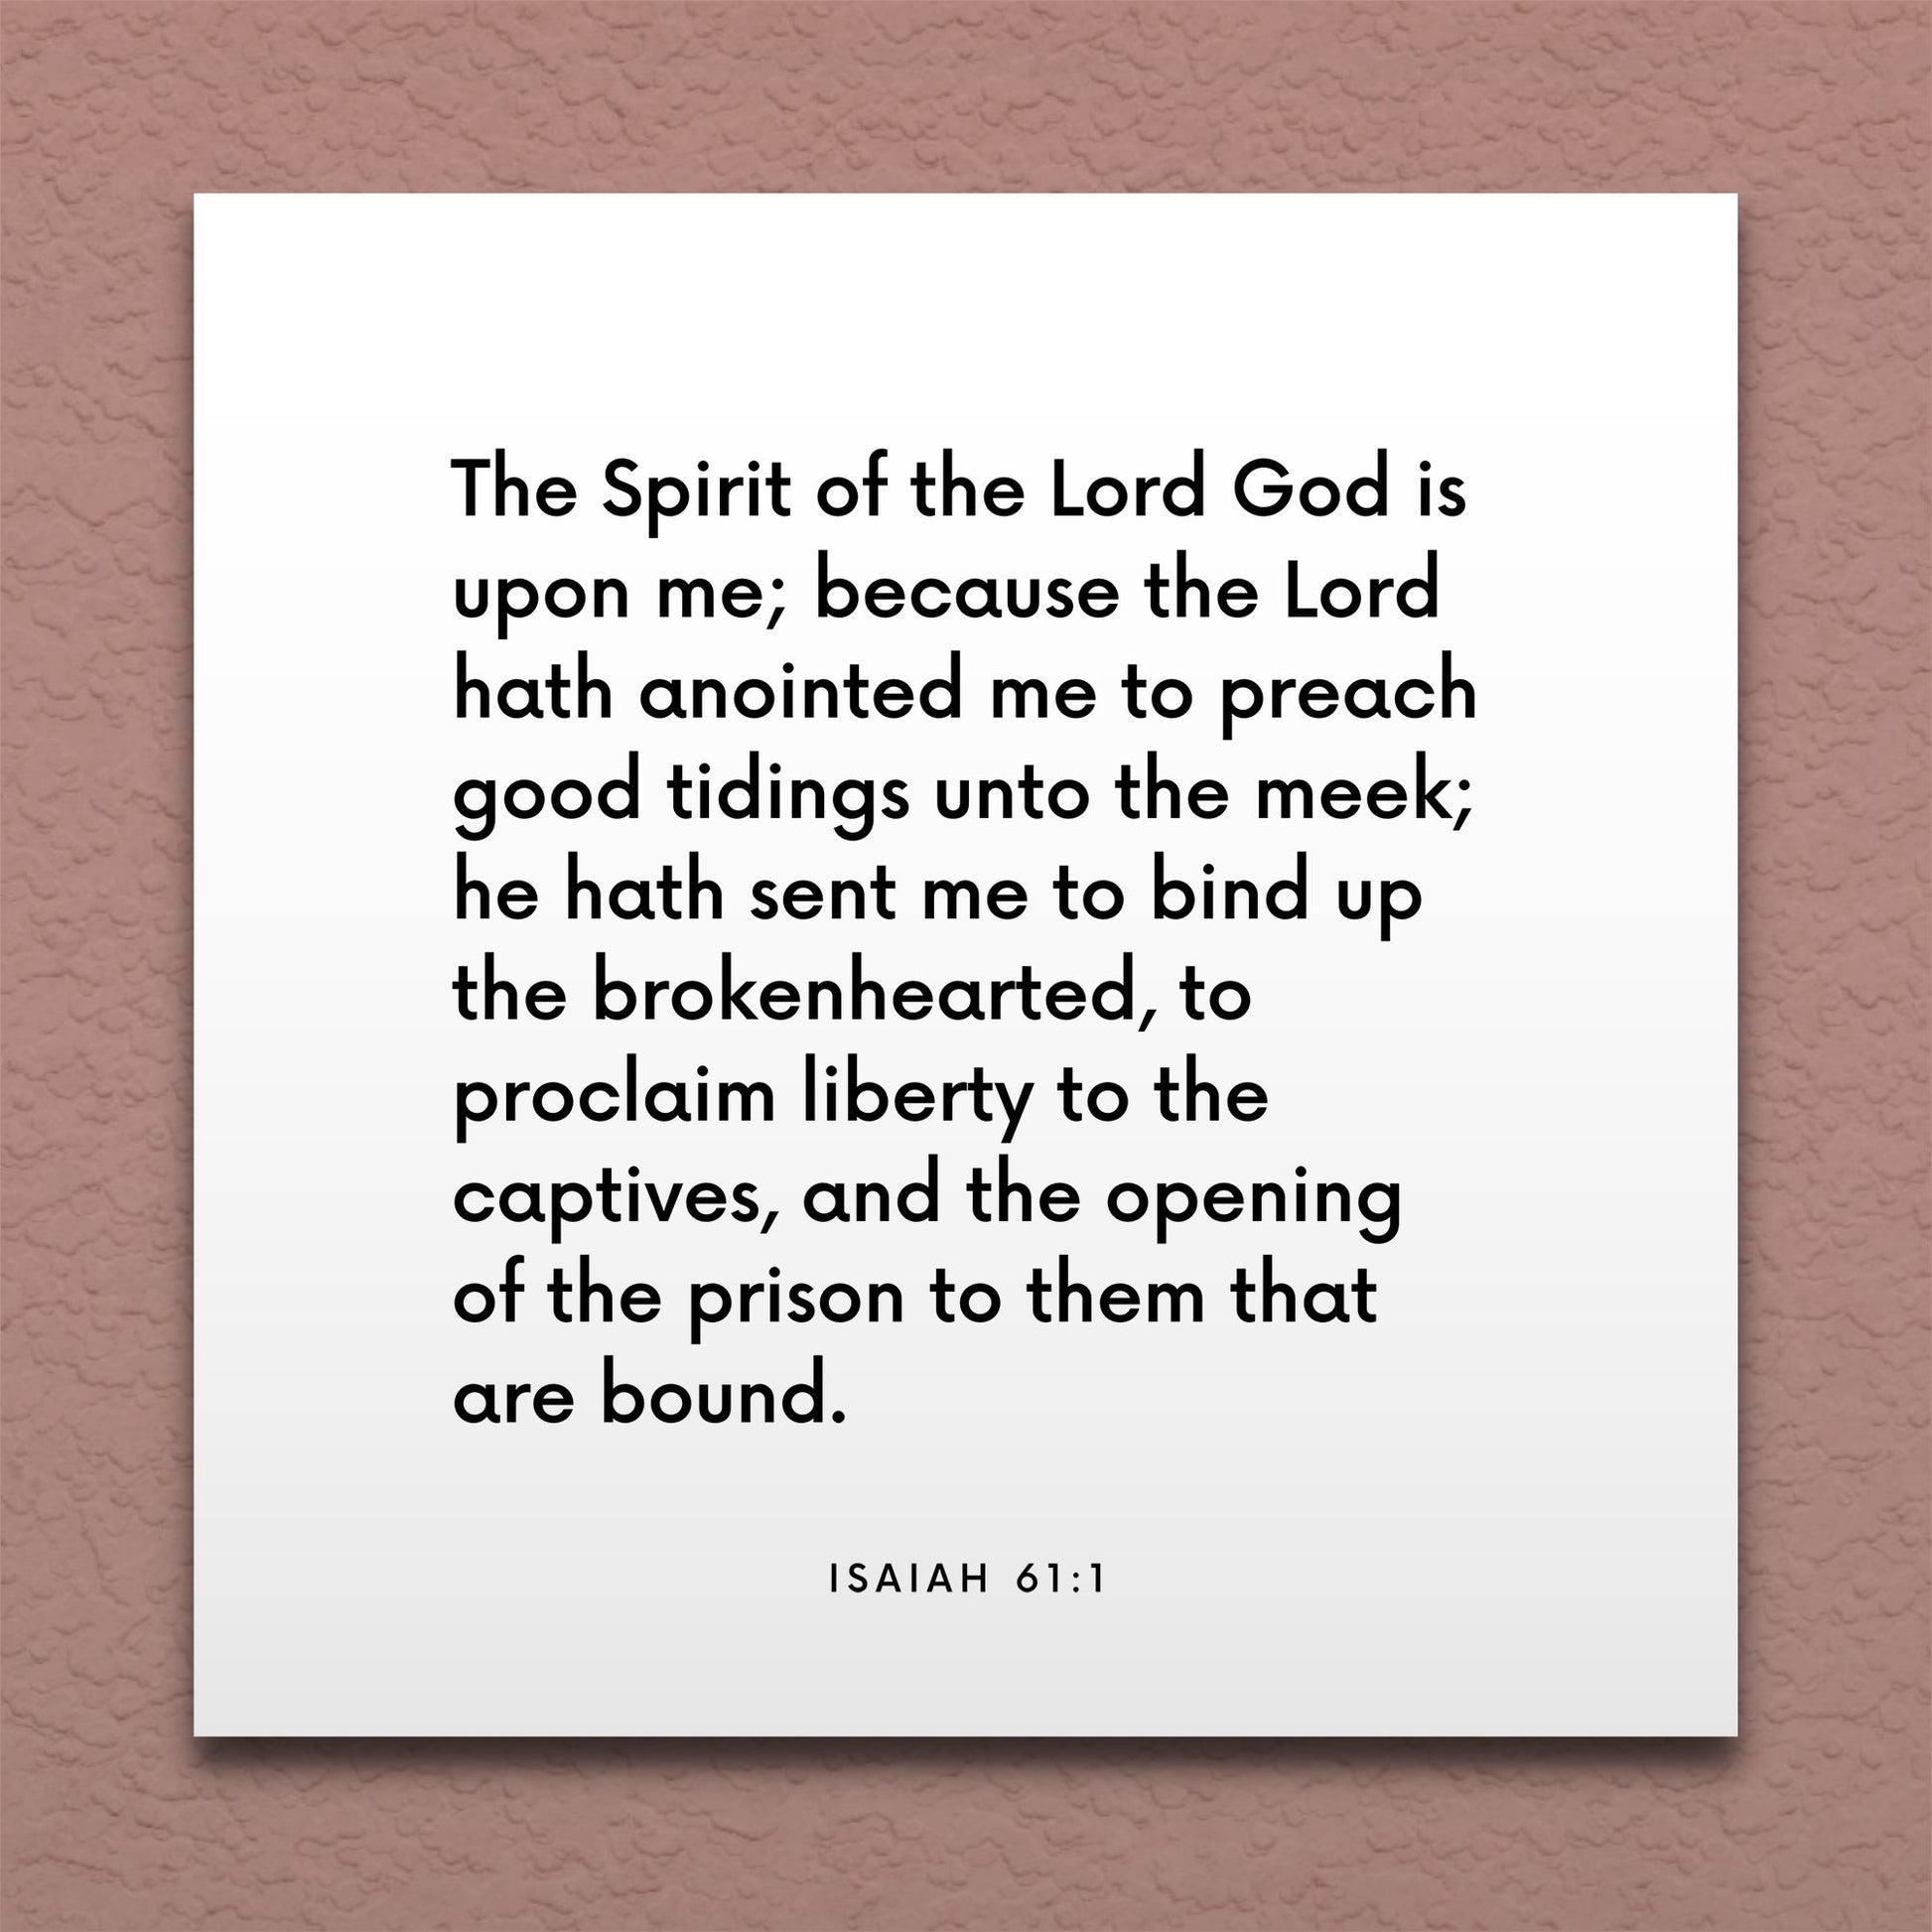 Wall-mounted scripture tile for Isaiah 61:1 - "He hath sent me to bind up the brokenhearted"